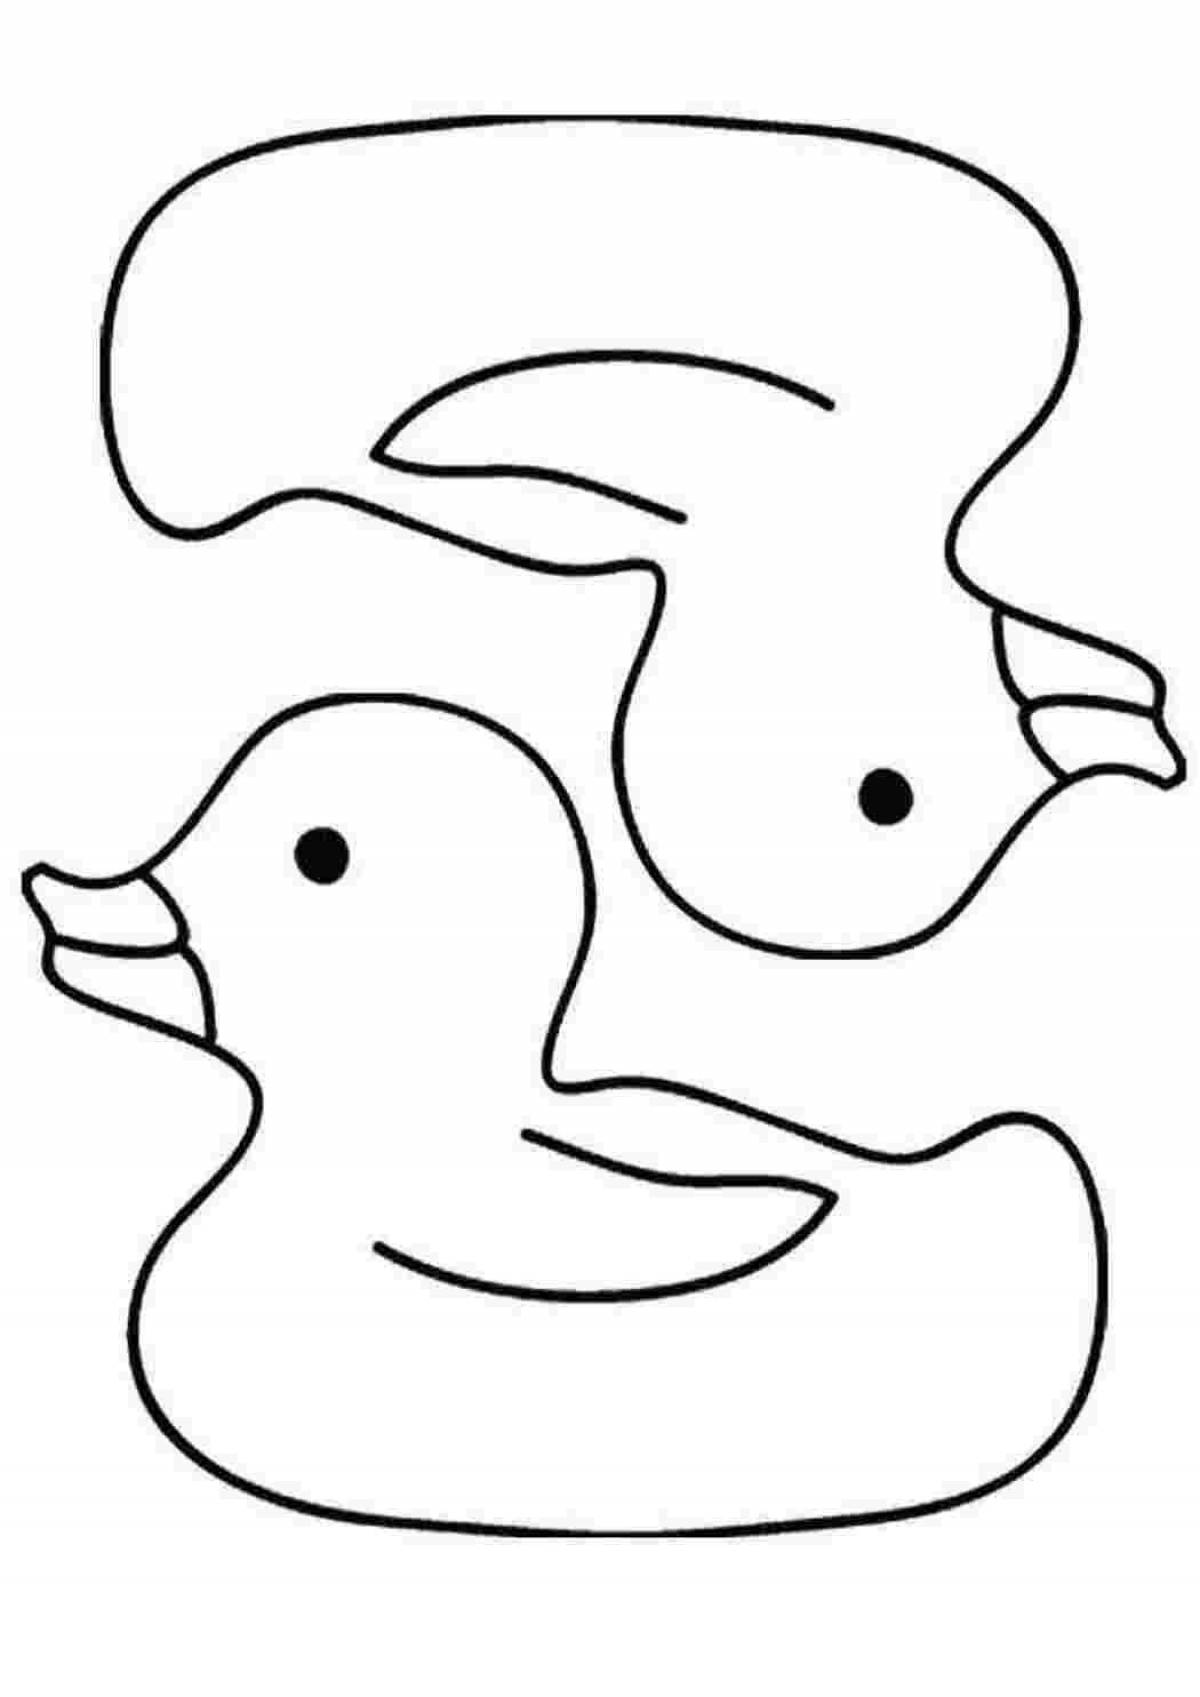 Coloring book amazing duck toy